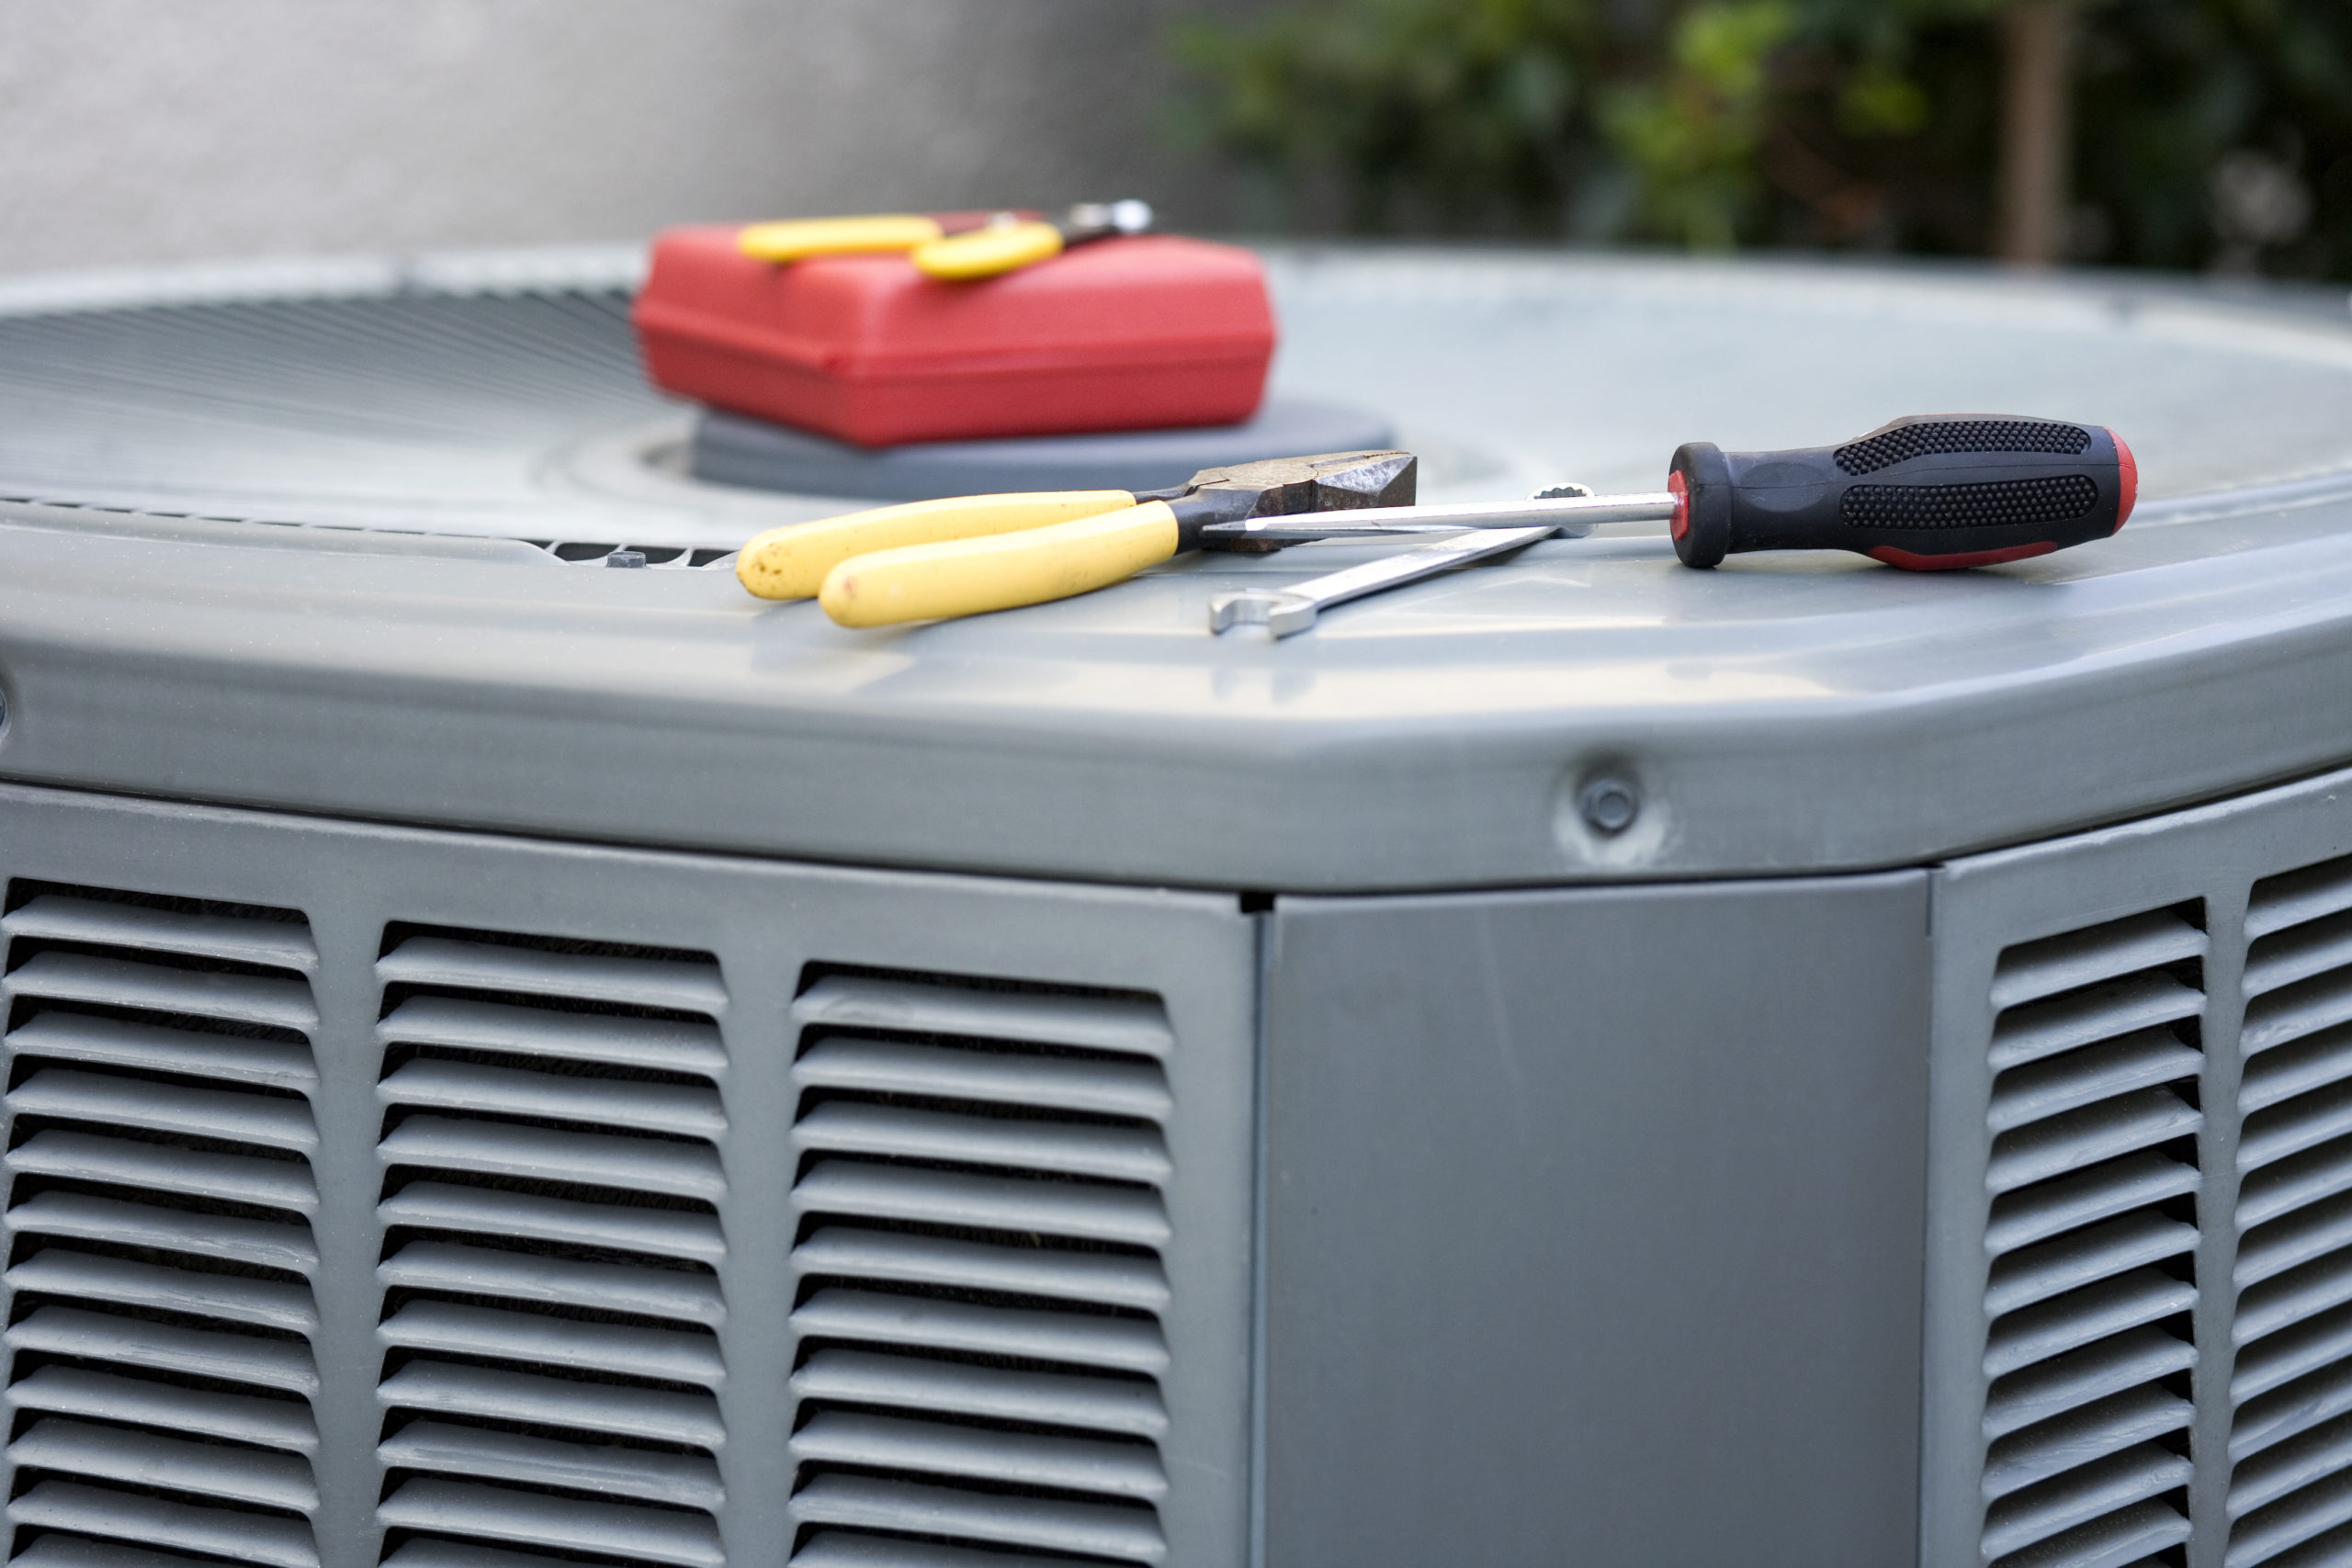 Do Some AC Components Fail More Easily in the Summer Heat?